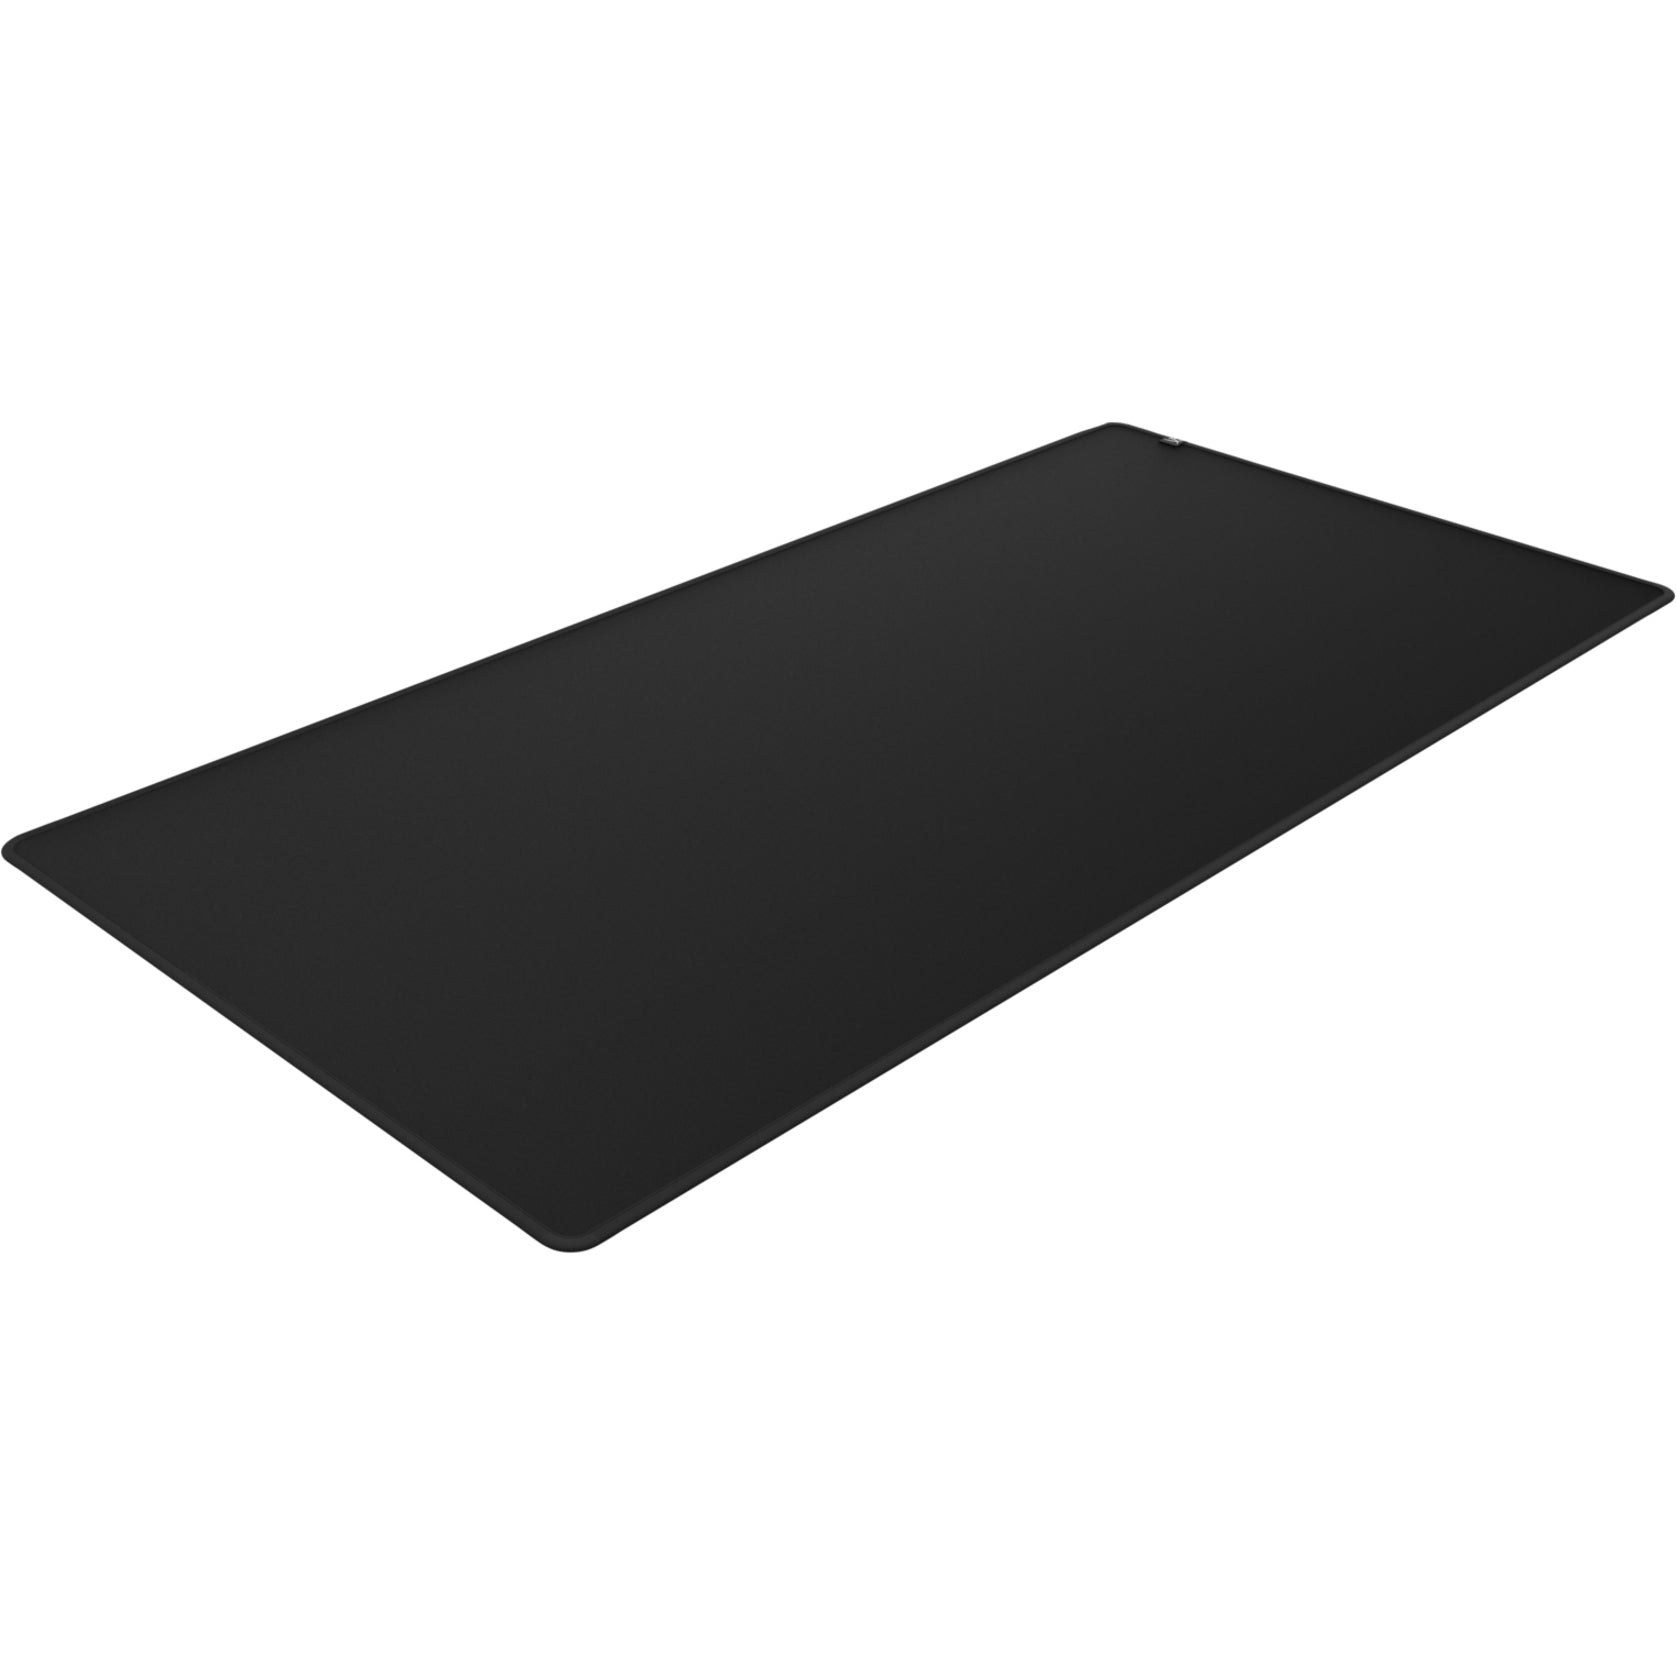 HyperX 4Z7X6AA Pulsefire Mat Gaming Mouse Pad - Cloth (2XL), Tear Resistant, Anti-fray, Anti-slip, Wear Resistant, Textured